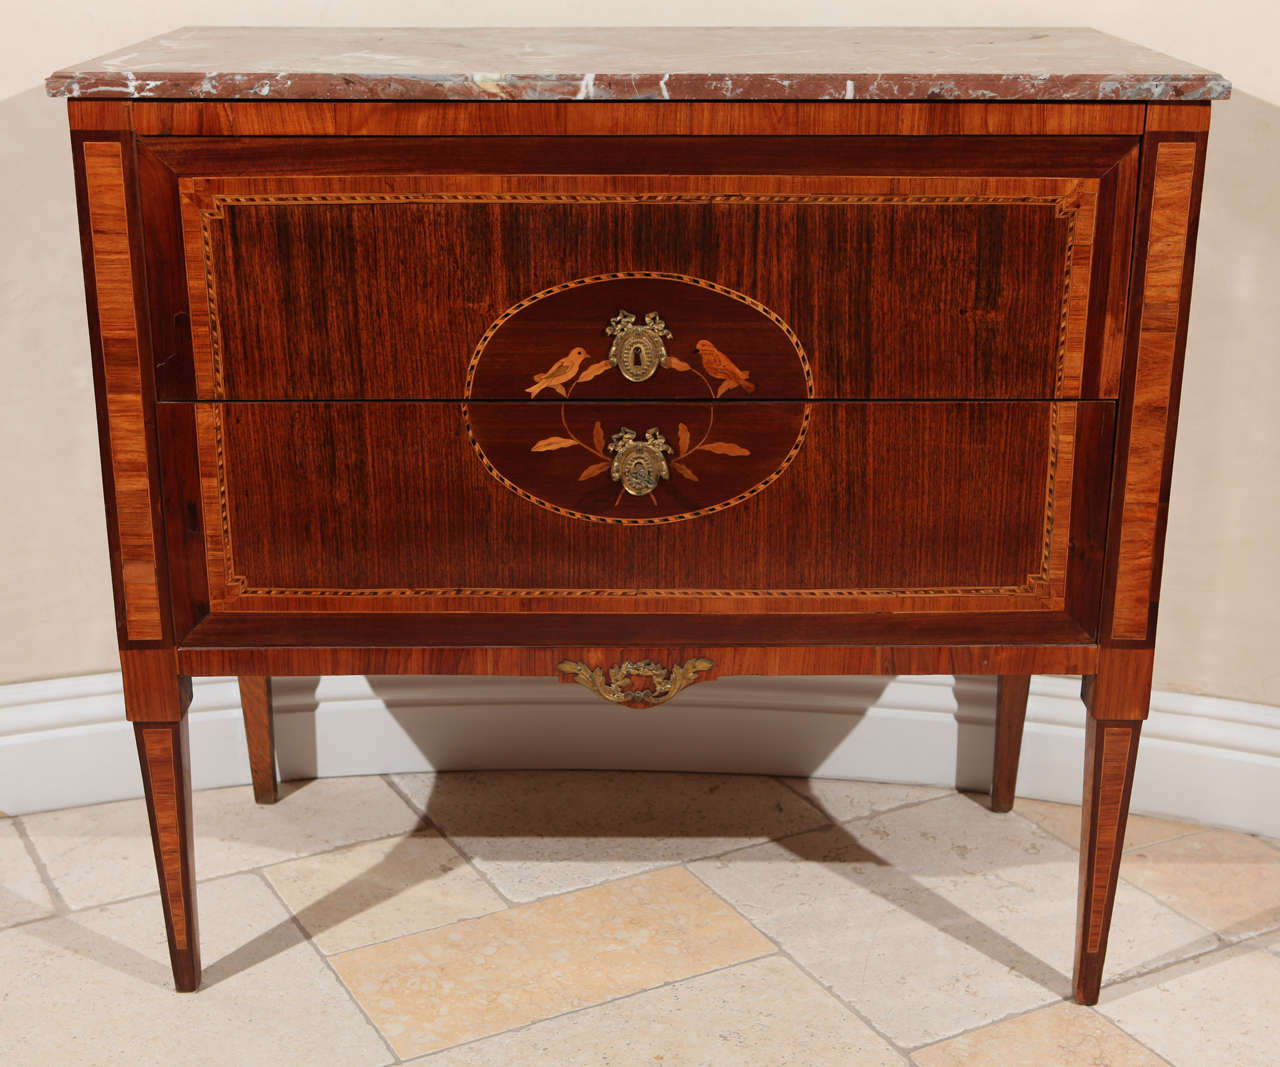 Early 19th century Italian Walnut two-Drawer Commode with Marble Top and Fruitwood Inlay of Bird and Flower Motif.  Stamped by Maker (SESSLE).The key is included and it is signed by the maker.  The marble top is original.